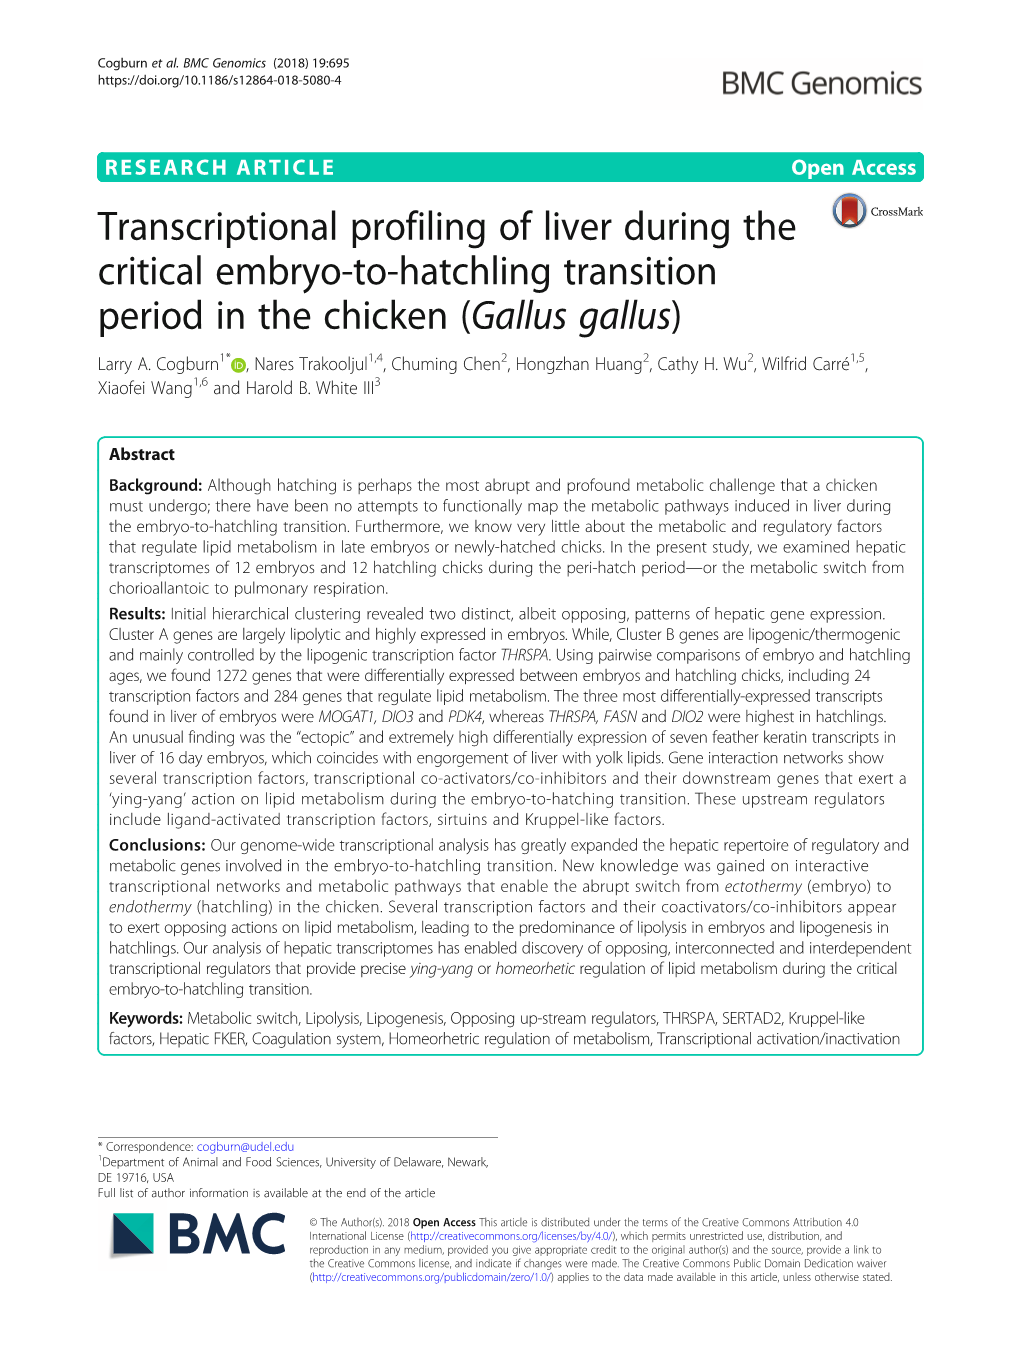 Transcriptional Profiling of Liver During the Critical Embryo-To-Hatchling Transition Period in the Chicken (Gallus Gallus) Larry A